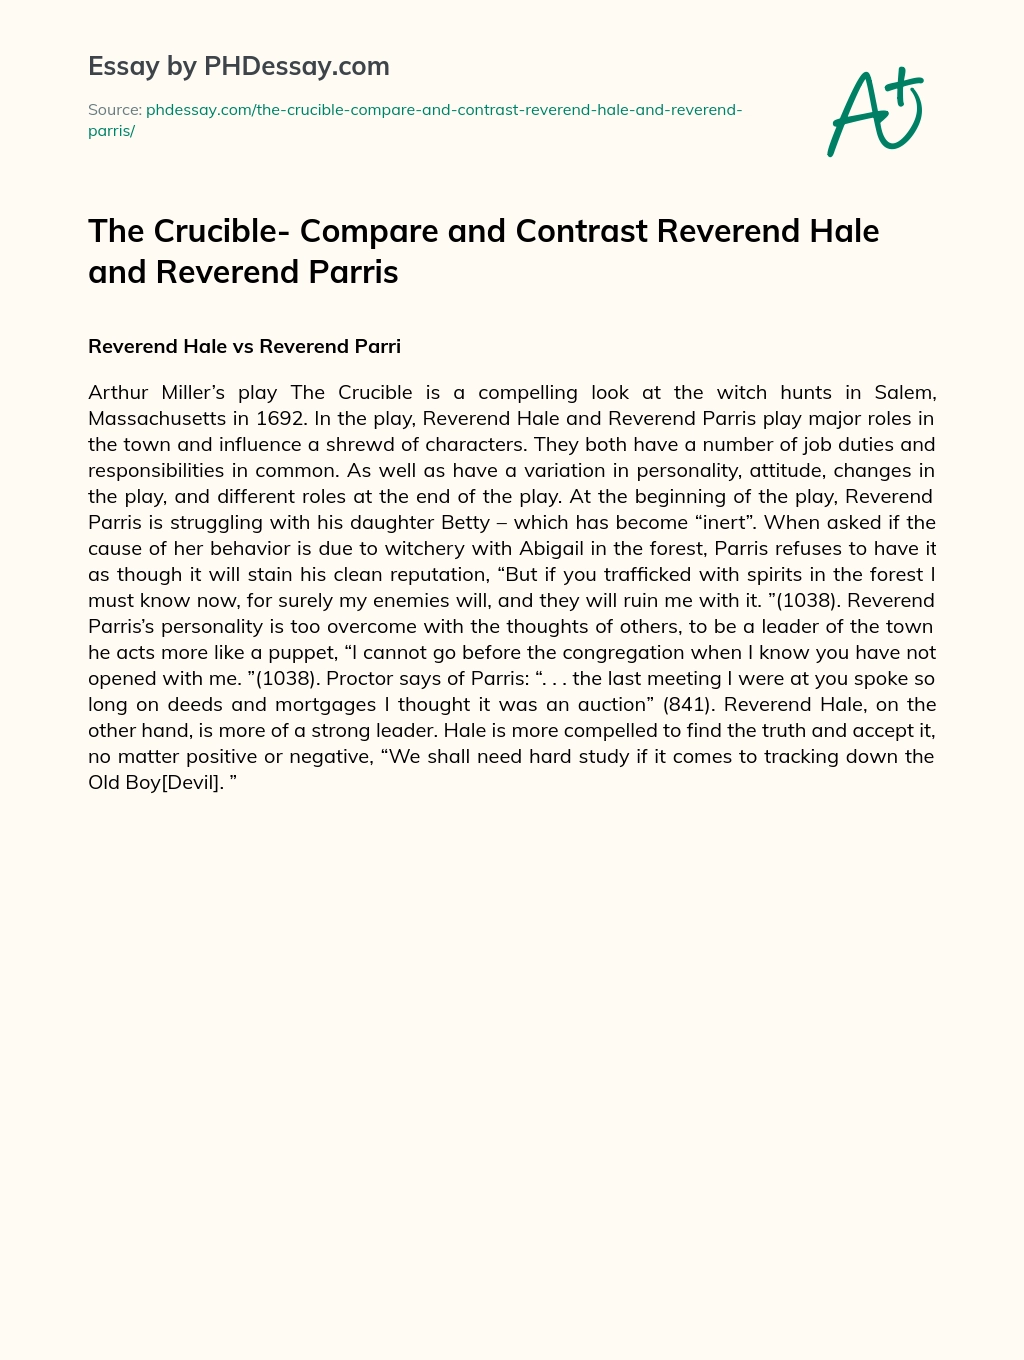 The Crucible- Compare and Contrast Reverend Hale and Reverend Parris essay